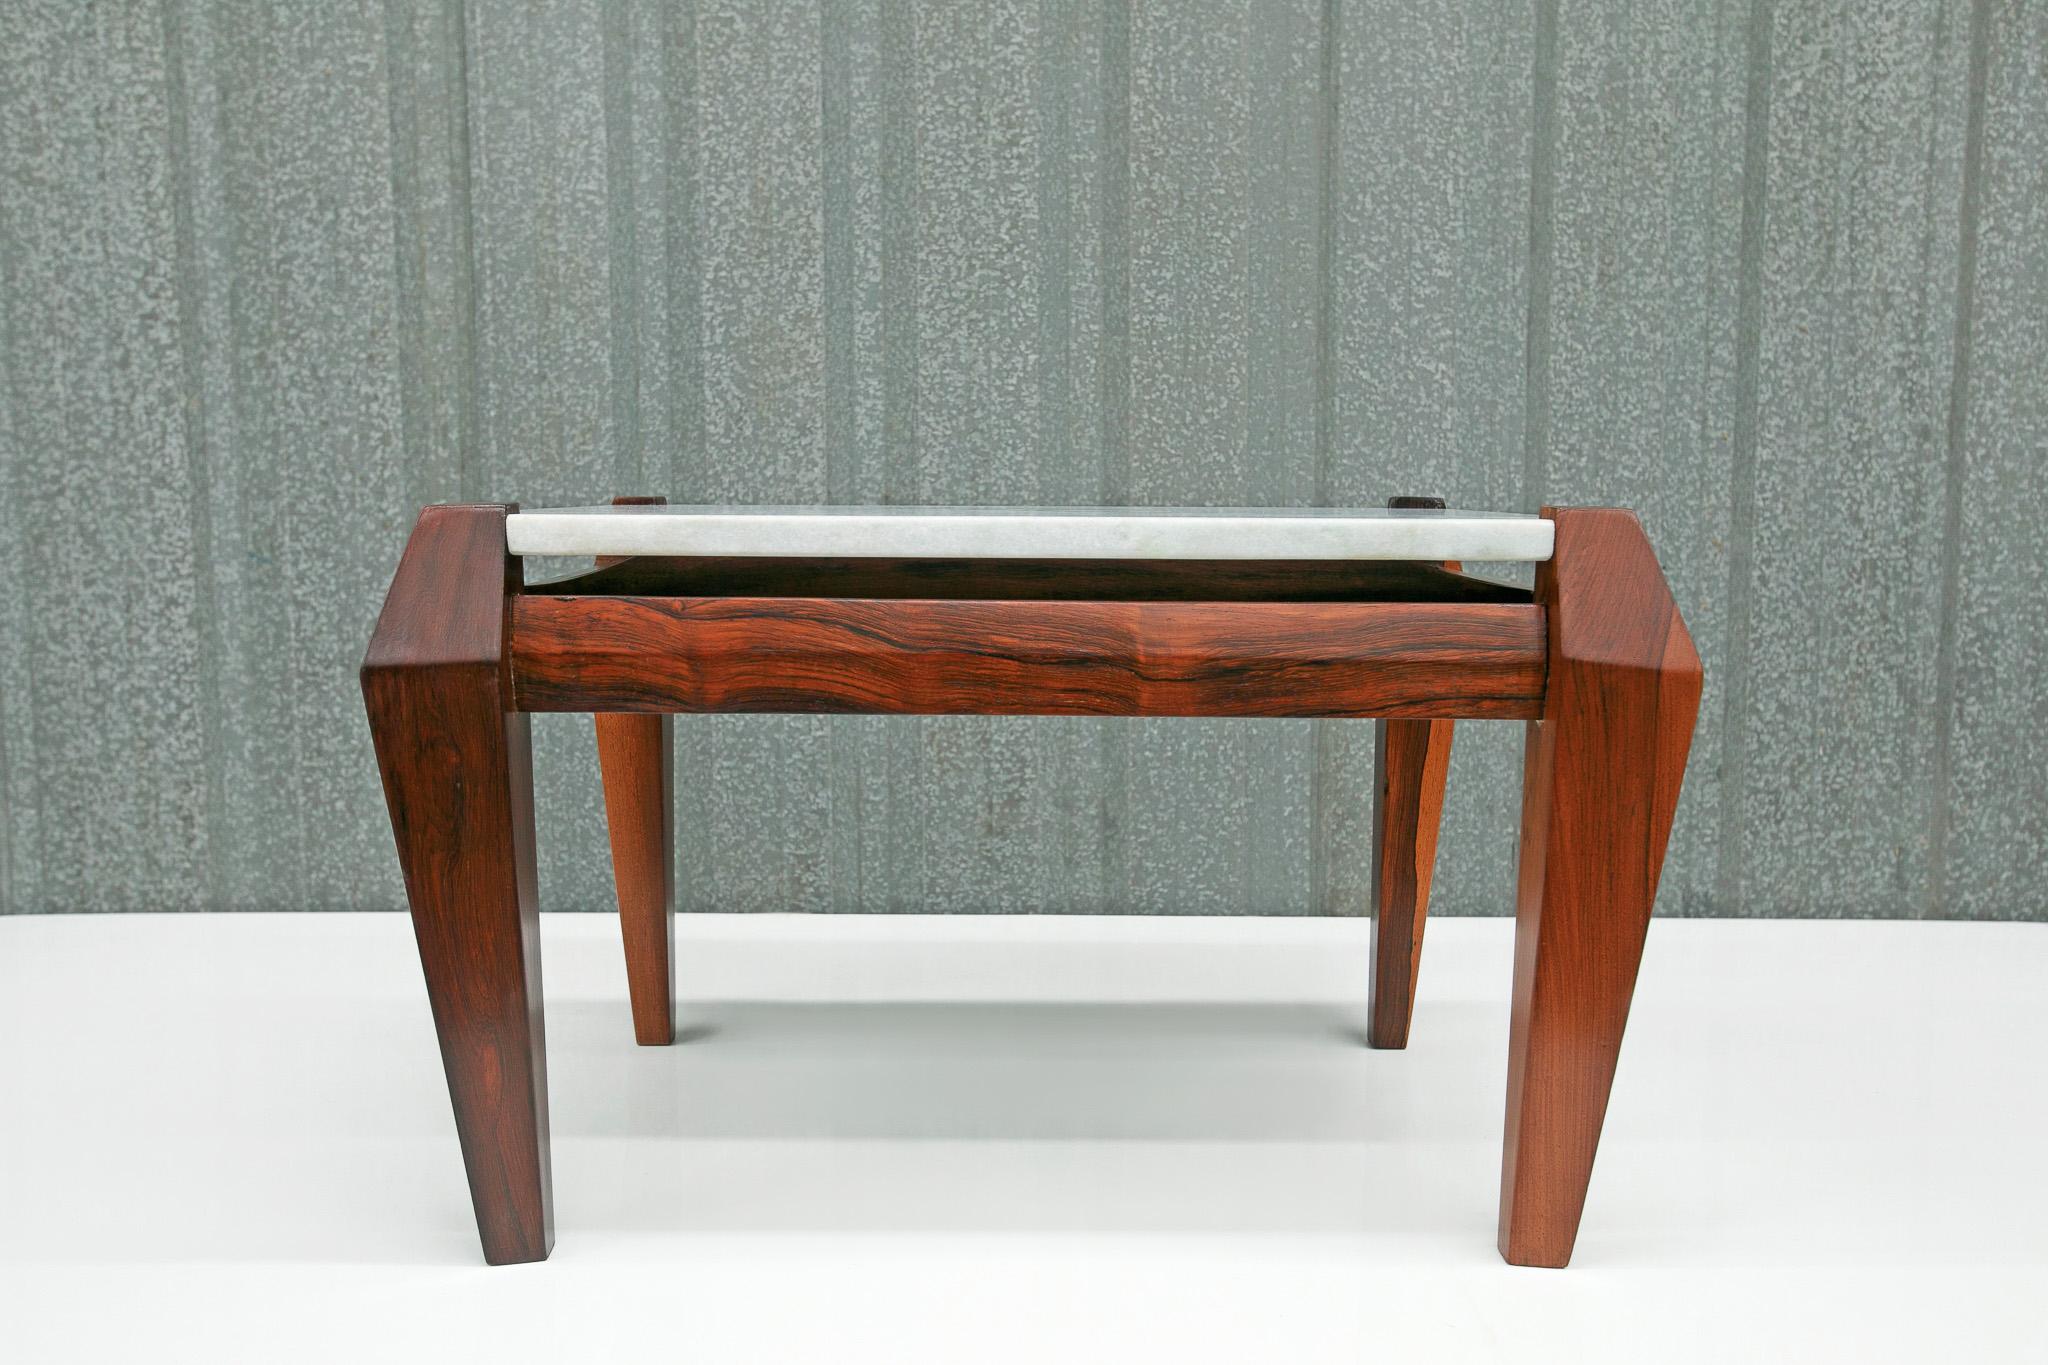 Available today, this Mid-Century Modern Coffee Table, in solid Rosewood and Marble designed by Jean Gillon in the 60s is nothing less than spectacular!

What makes this coffee table so special is the sleek design iconic from Jean Gillon. The